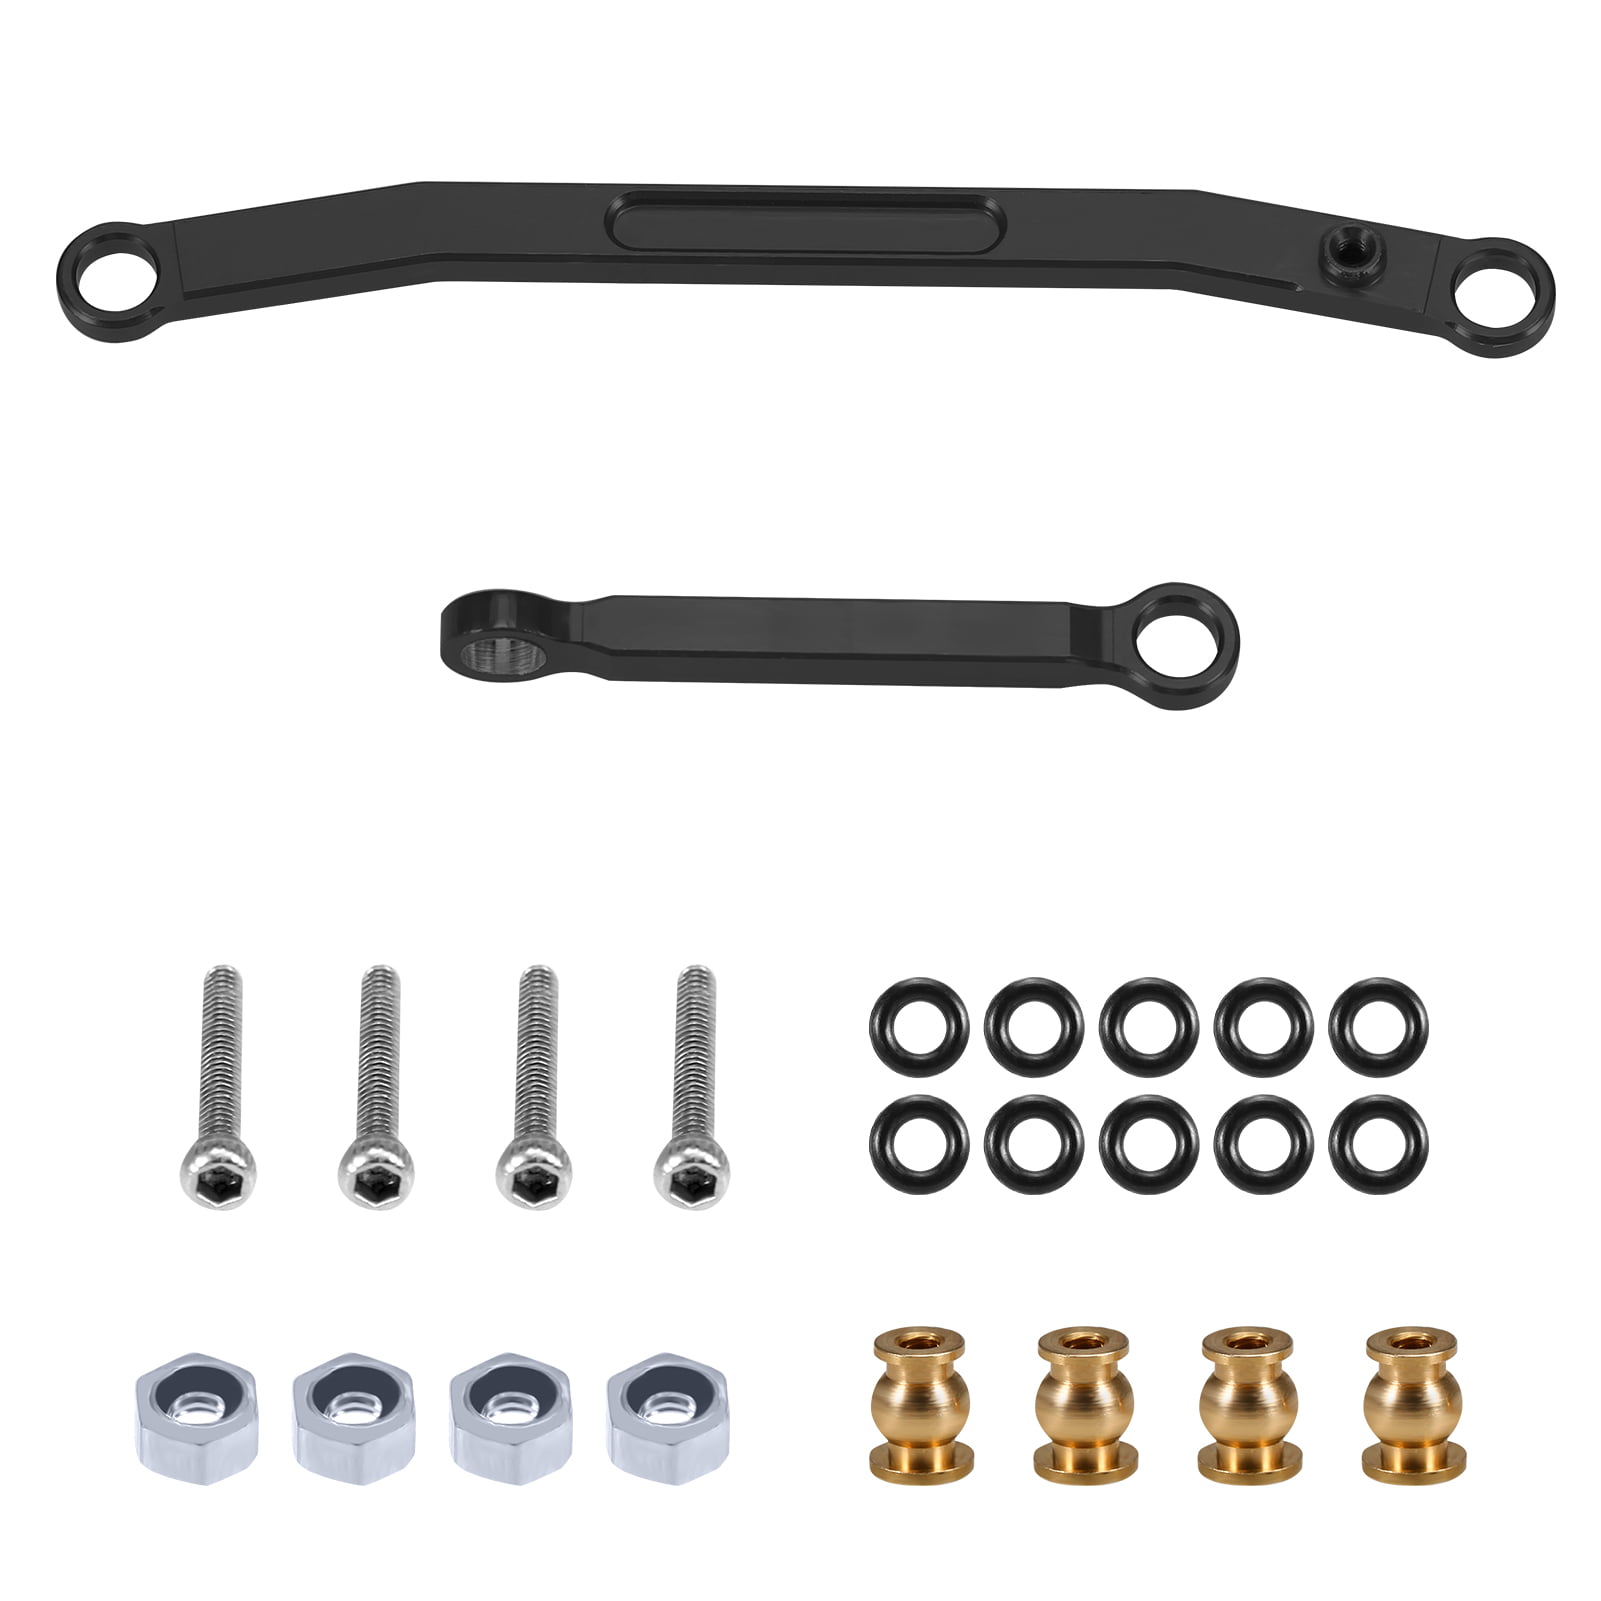 For Axial SCX24 1/24 AXI90081 RC Car Shell Linkage Link Pull Rod Kits Upgrade US 